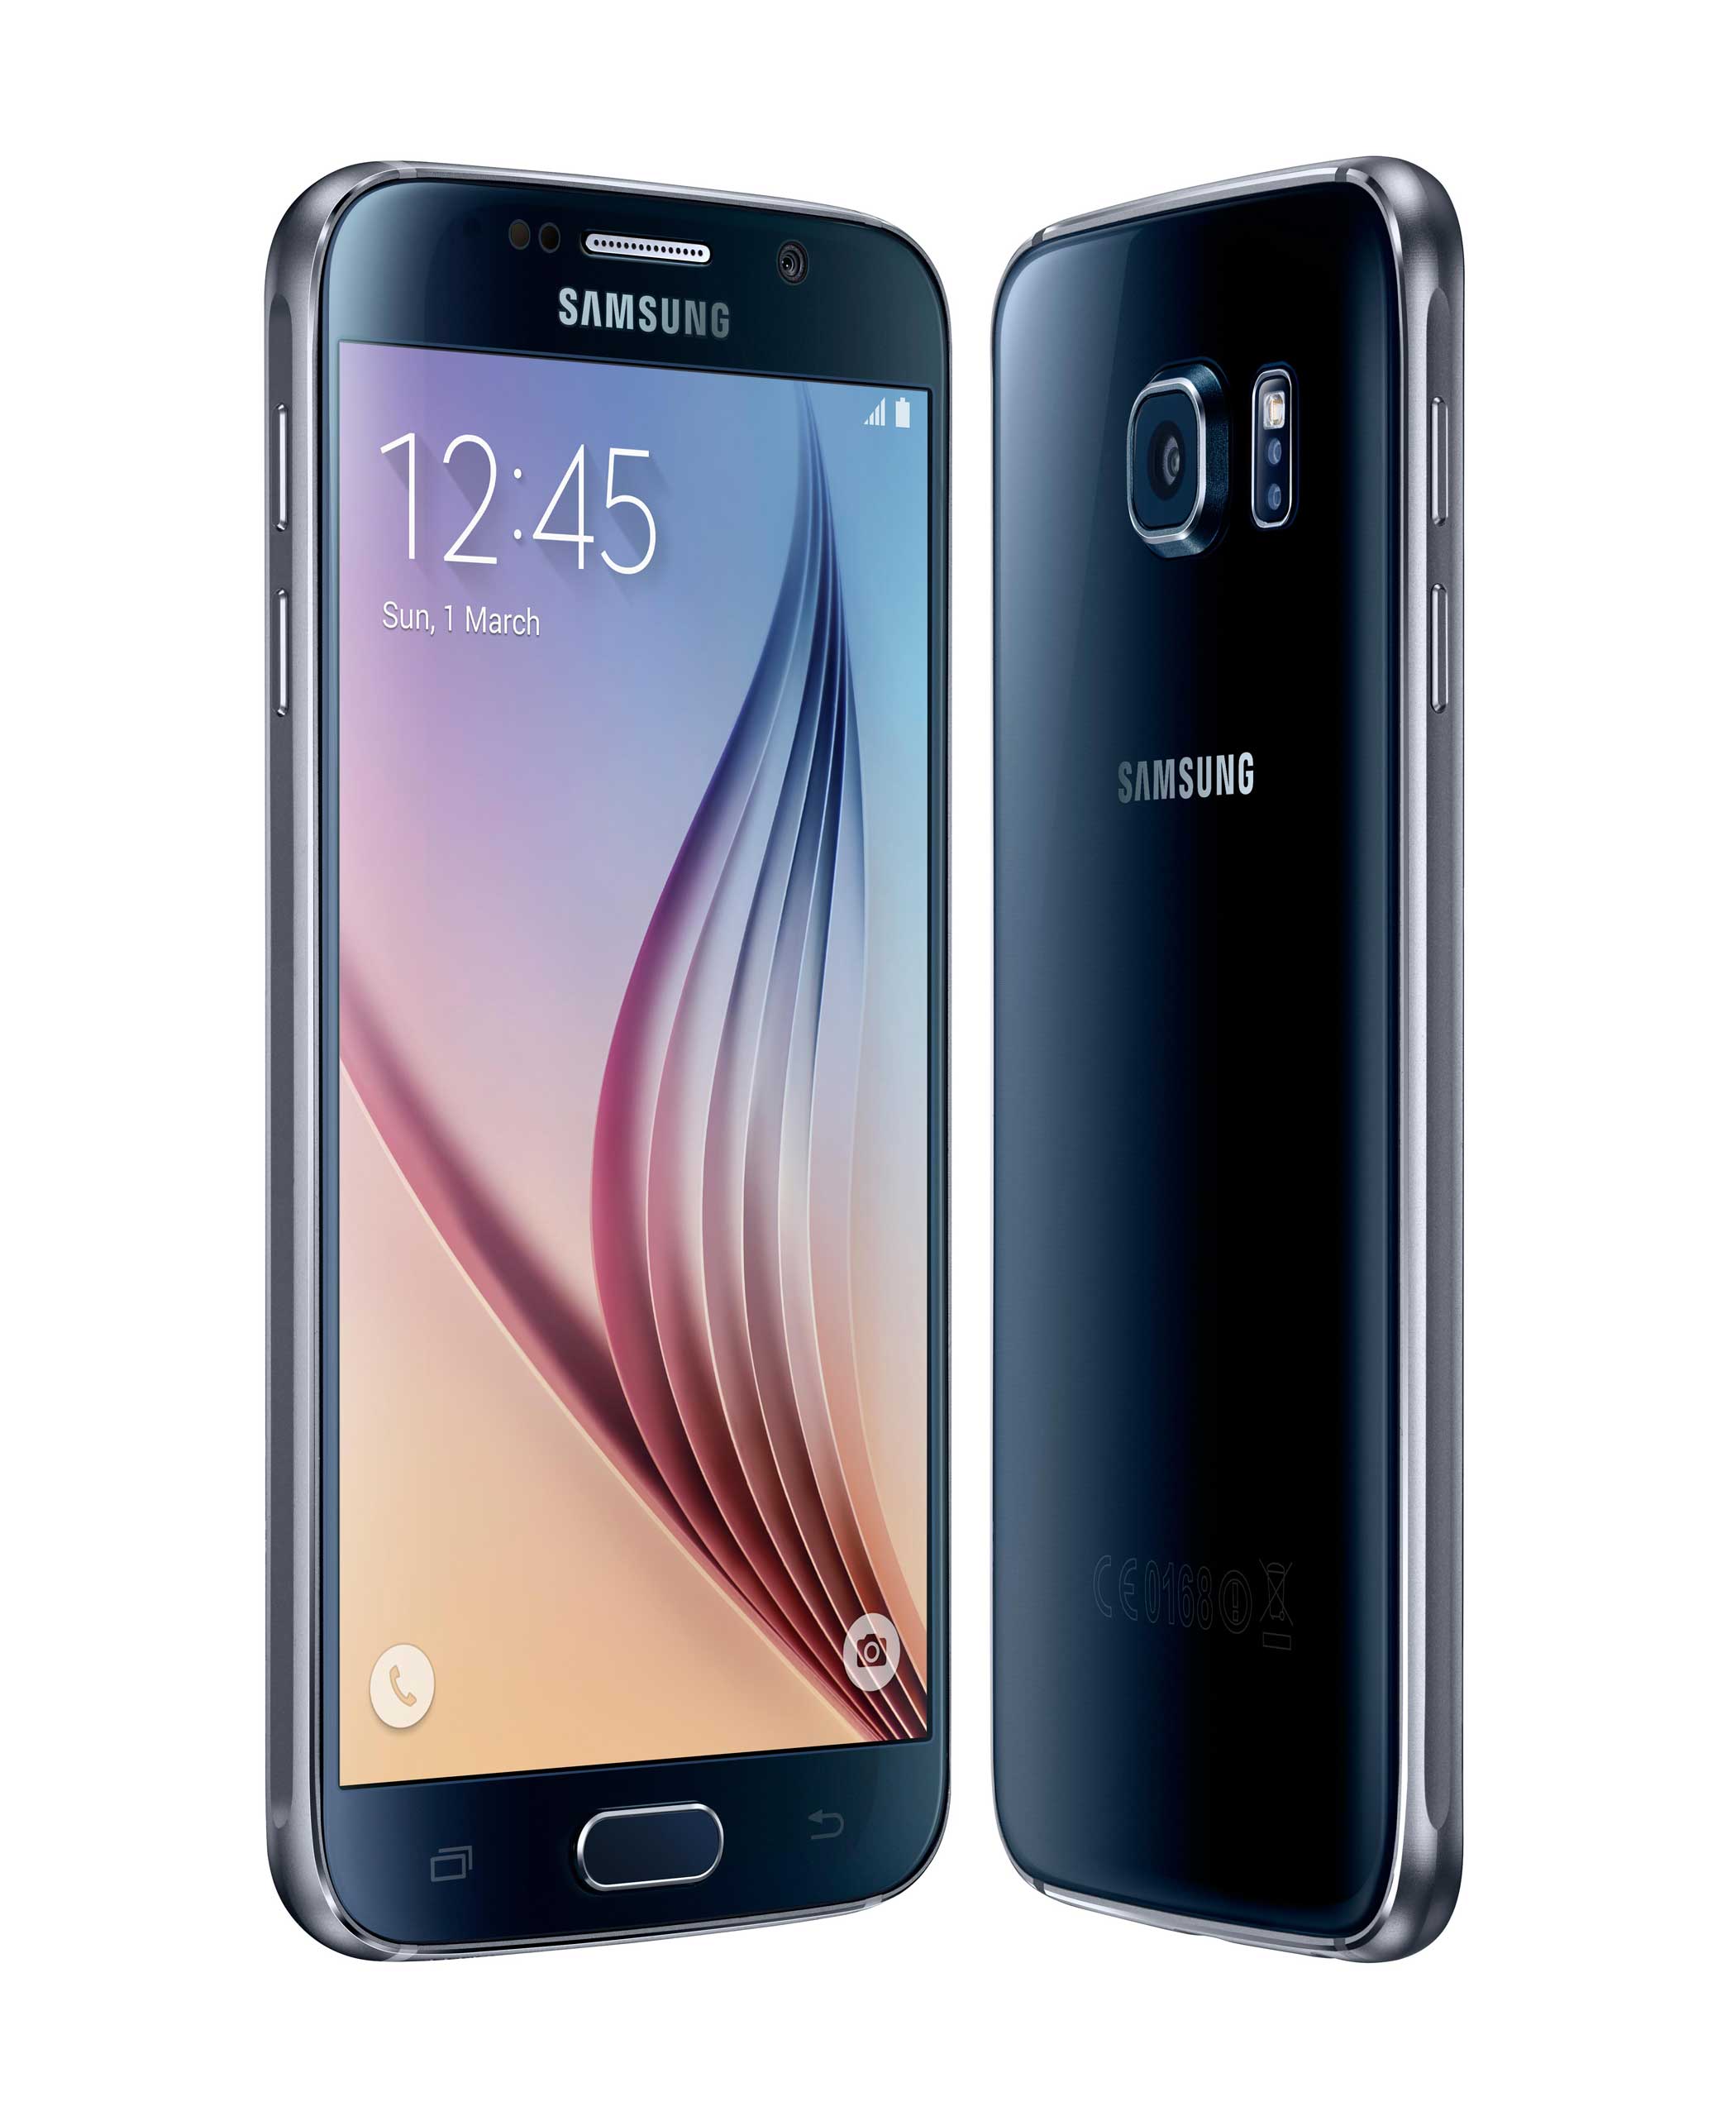 Galaxy S6: Considered the flagship of Samsung’s high-end smartphones, the Galaxy S6 features a 5.1-inch Super AMOLED screen, two quad-core processors and a 16 Megapixel camera.